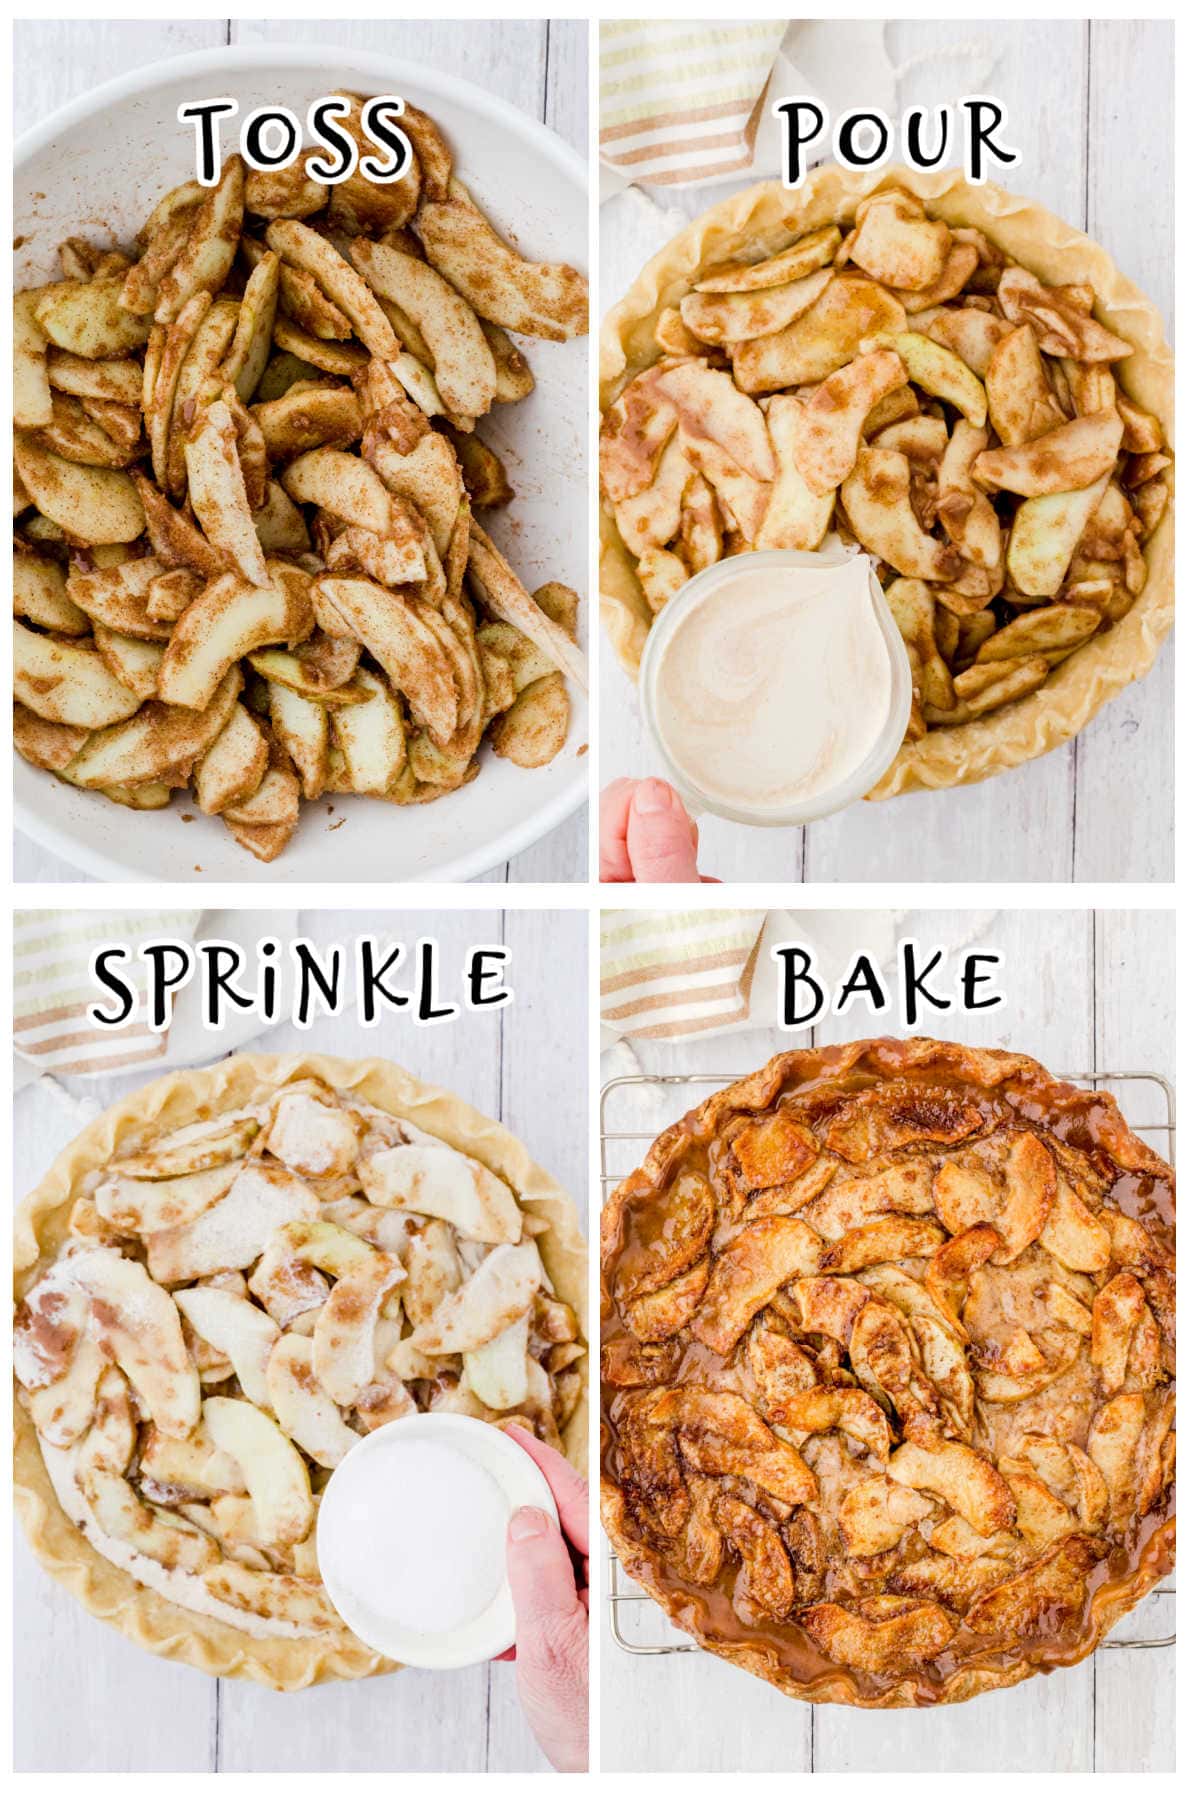 Step by step images showing how to make German apple pie from scratch.